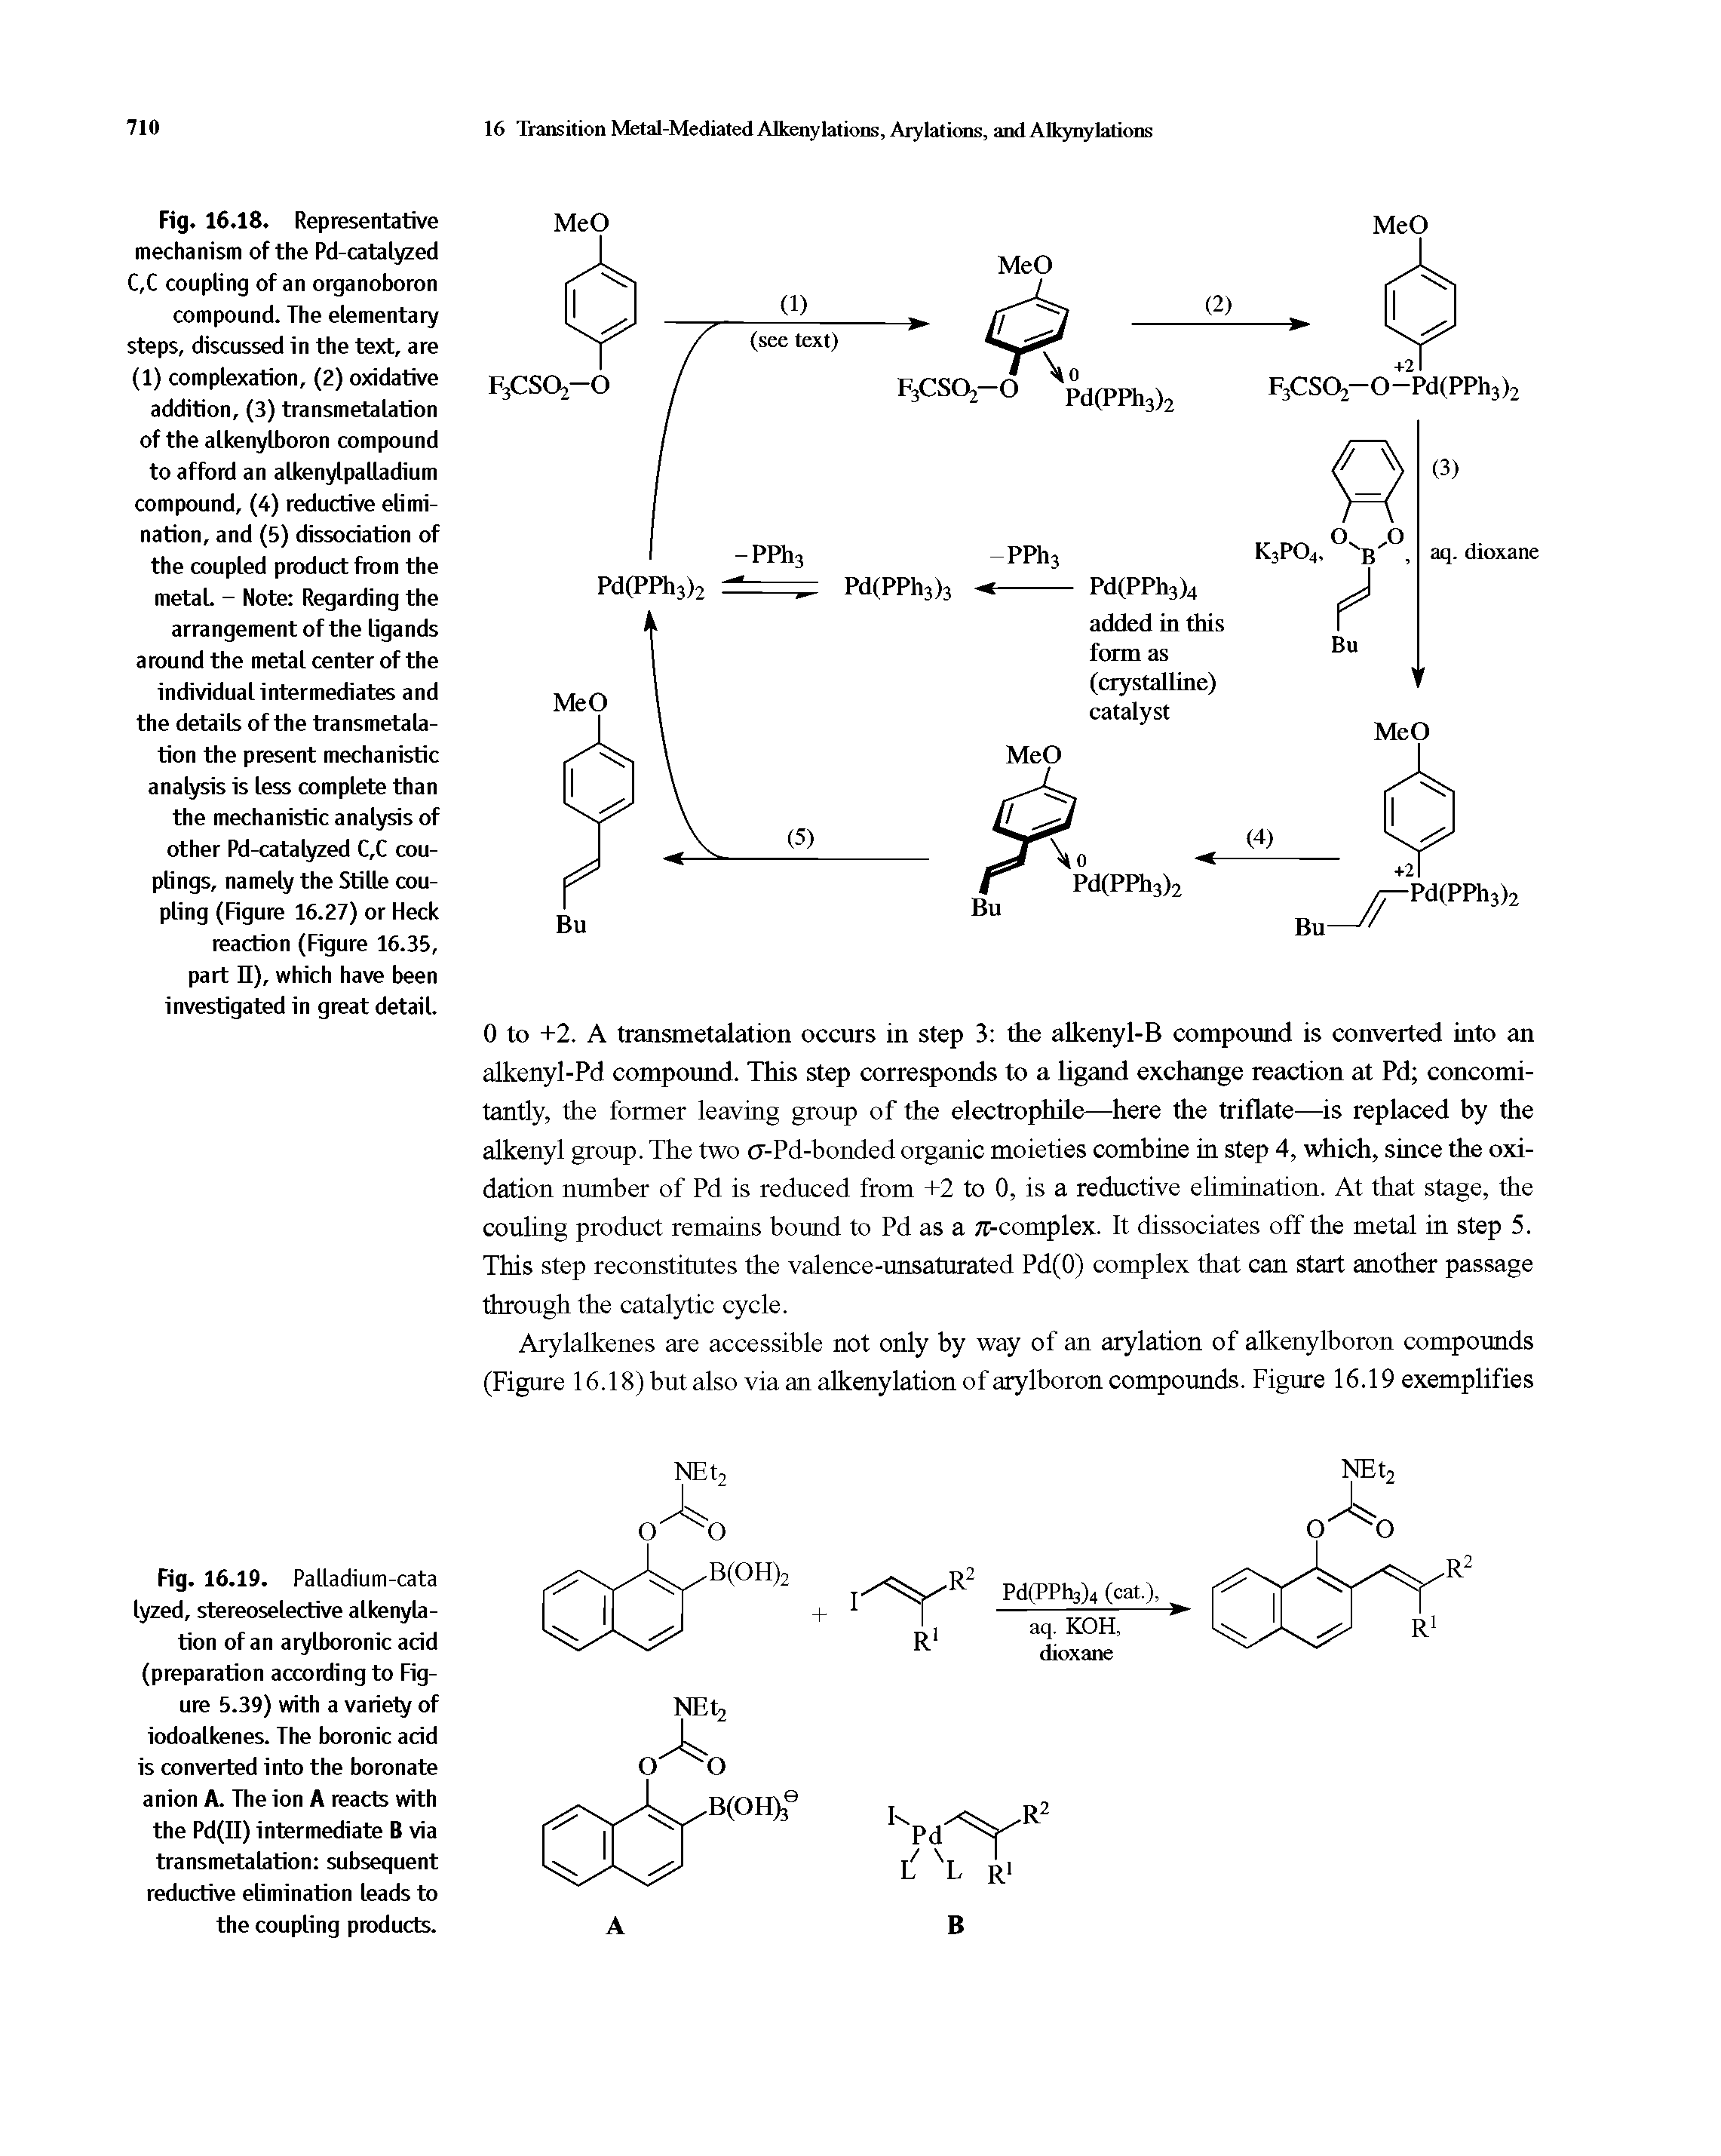 Fig. 16.18. Representative mechanism of the Pd-catalyzed C,C coupling of an organoboron compound. The elementary steps, discussed in the text, are (1) complexation, (2) oxidative addition, (3) transmetalation of the alkenylboron compound to afford an alkenylpalladium compound, (4) reductive elimination, and (5) dissociation of the coupled product from the metal. - Note Regarding the arrangement of the ligands around the metal center of the individual intermediates and the details of the transmetalation the present mechanistic analysis is less complete than the mechanistic analysis of other Pd-catalyzed C,C couplings, namely the Stille coupling (Figure 16.27) or Heck reaction (Figure 16.35, part II), which have been investigated in great detail.